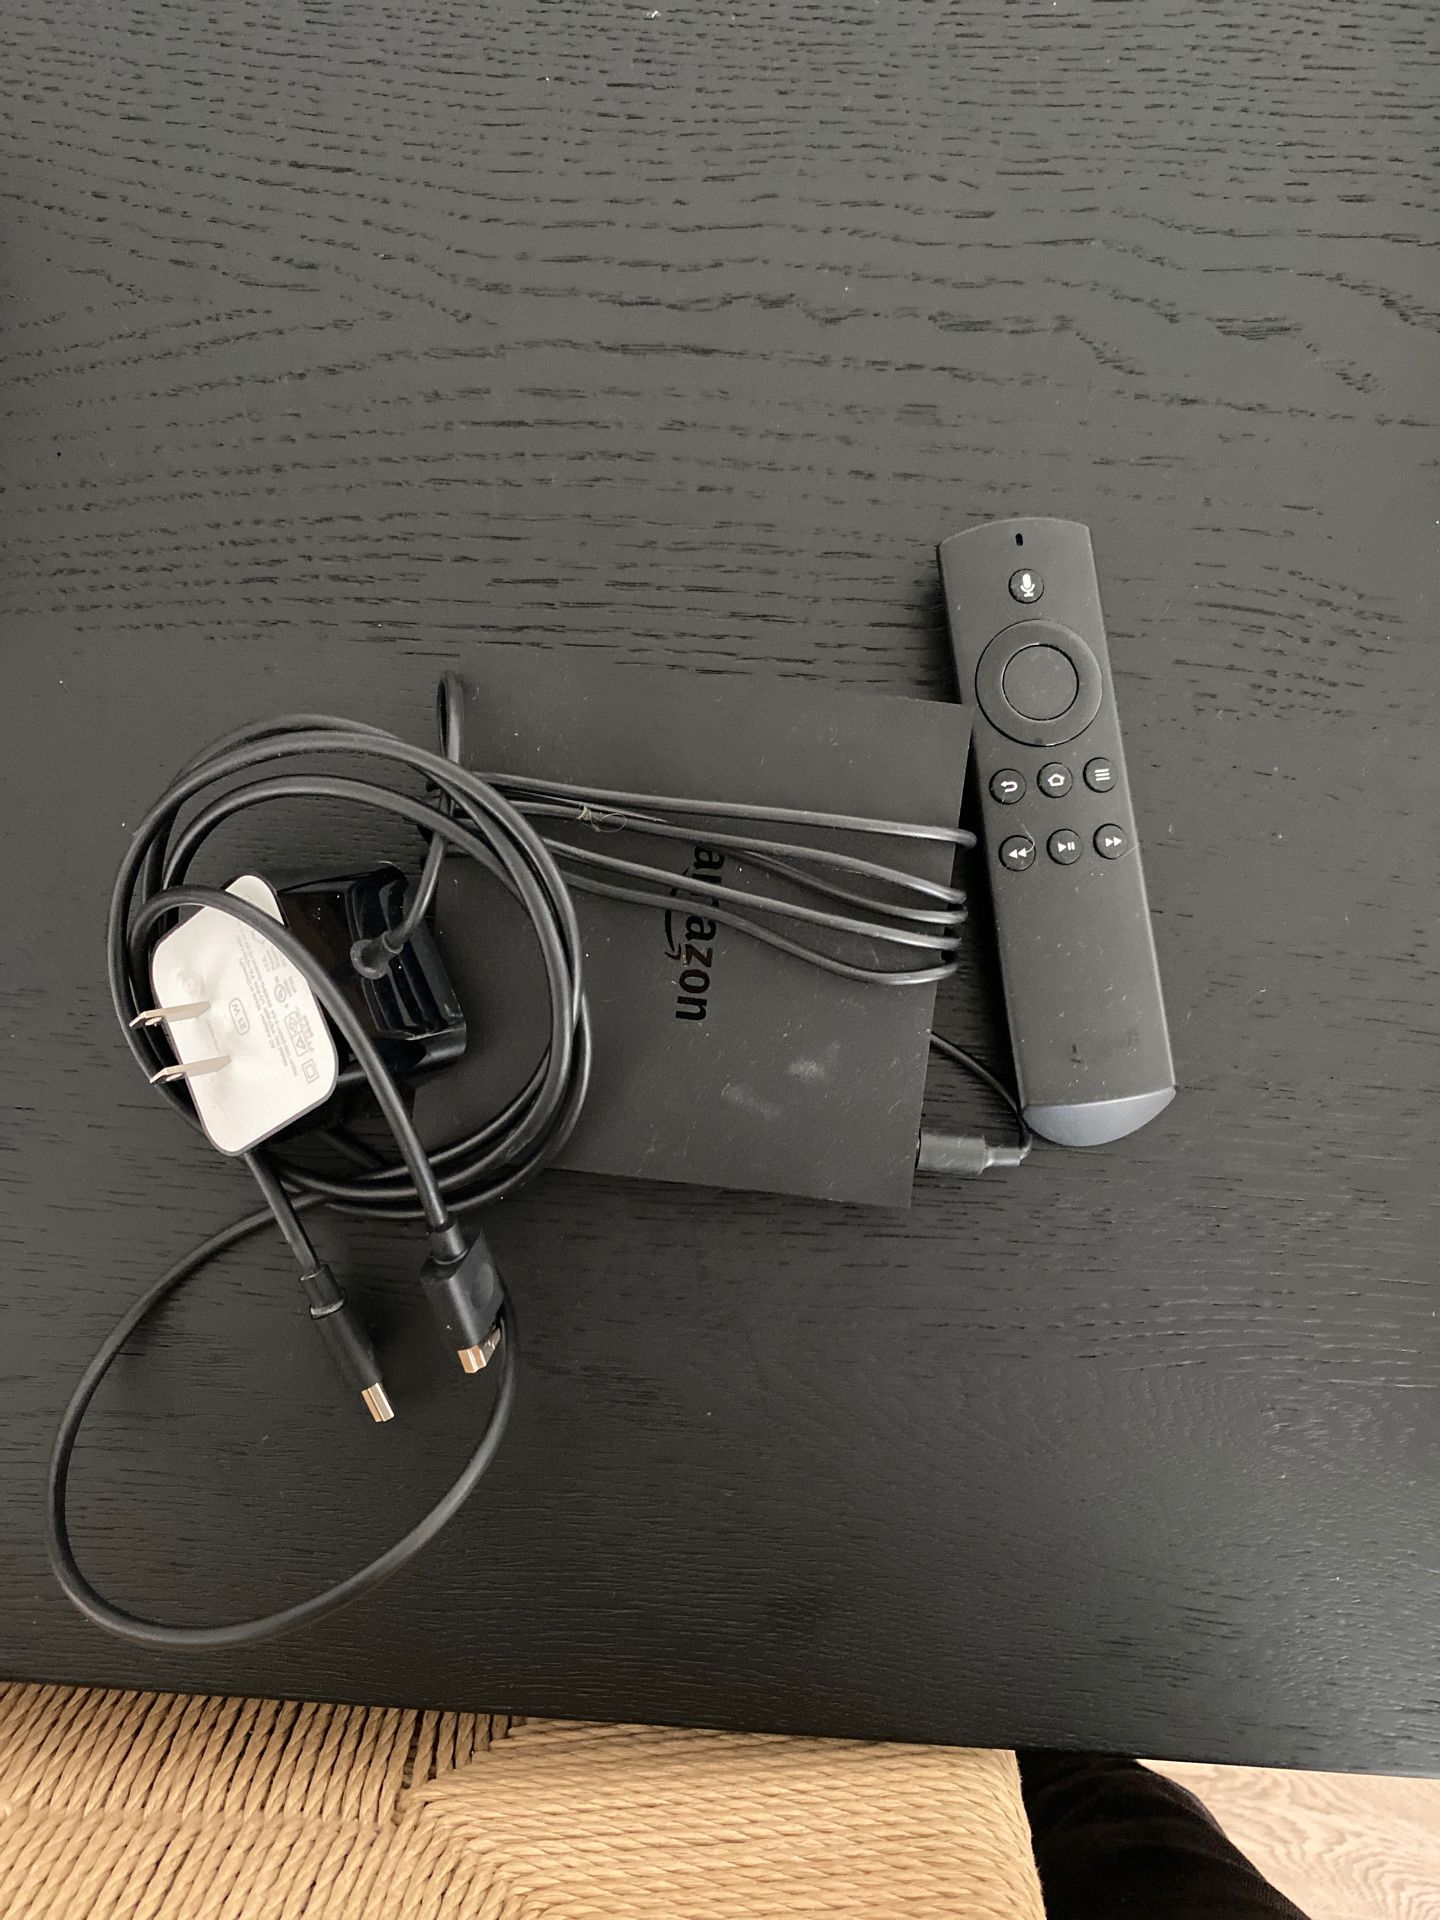 Amazon fire tv with remote